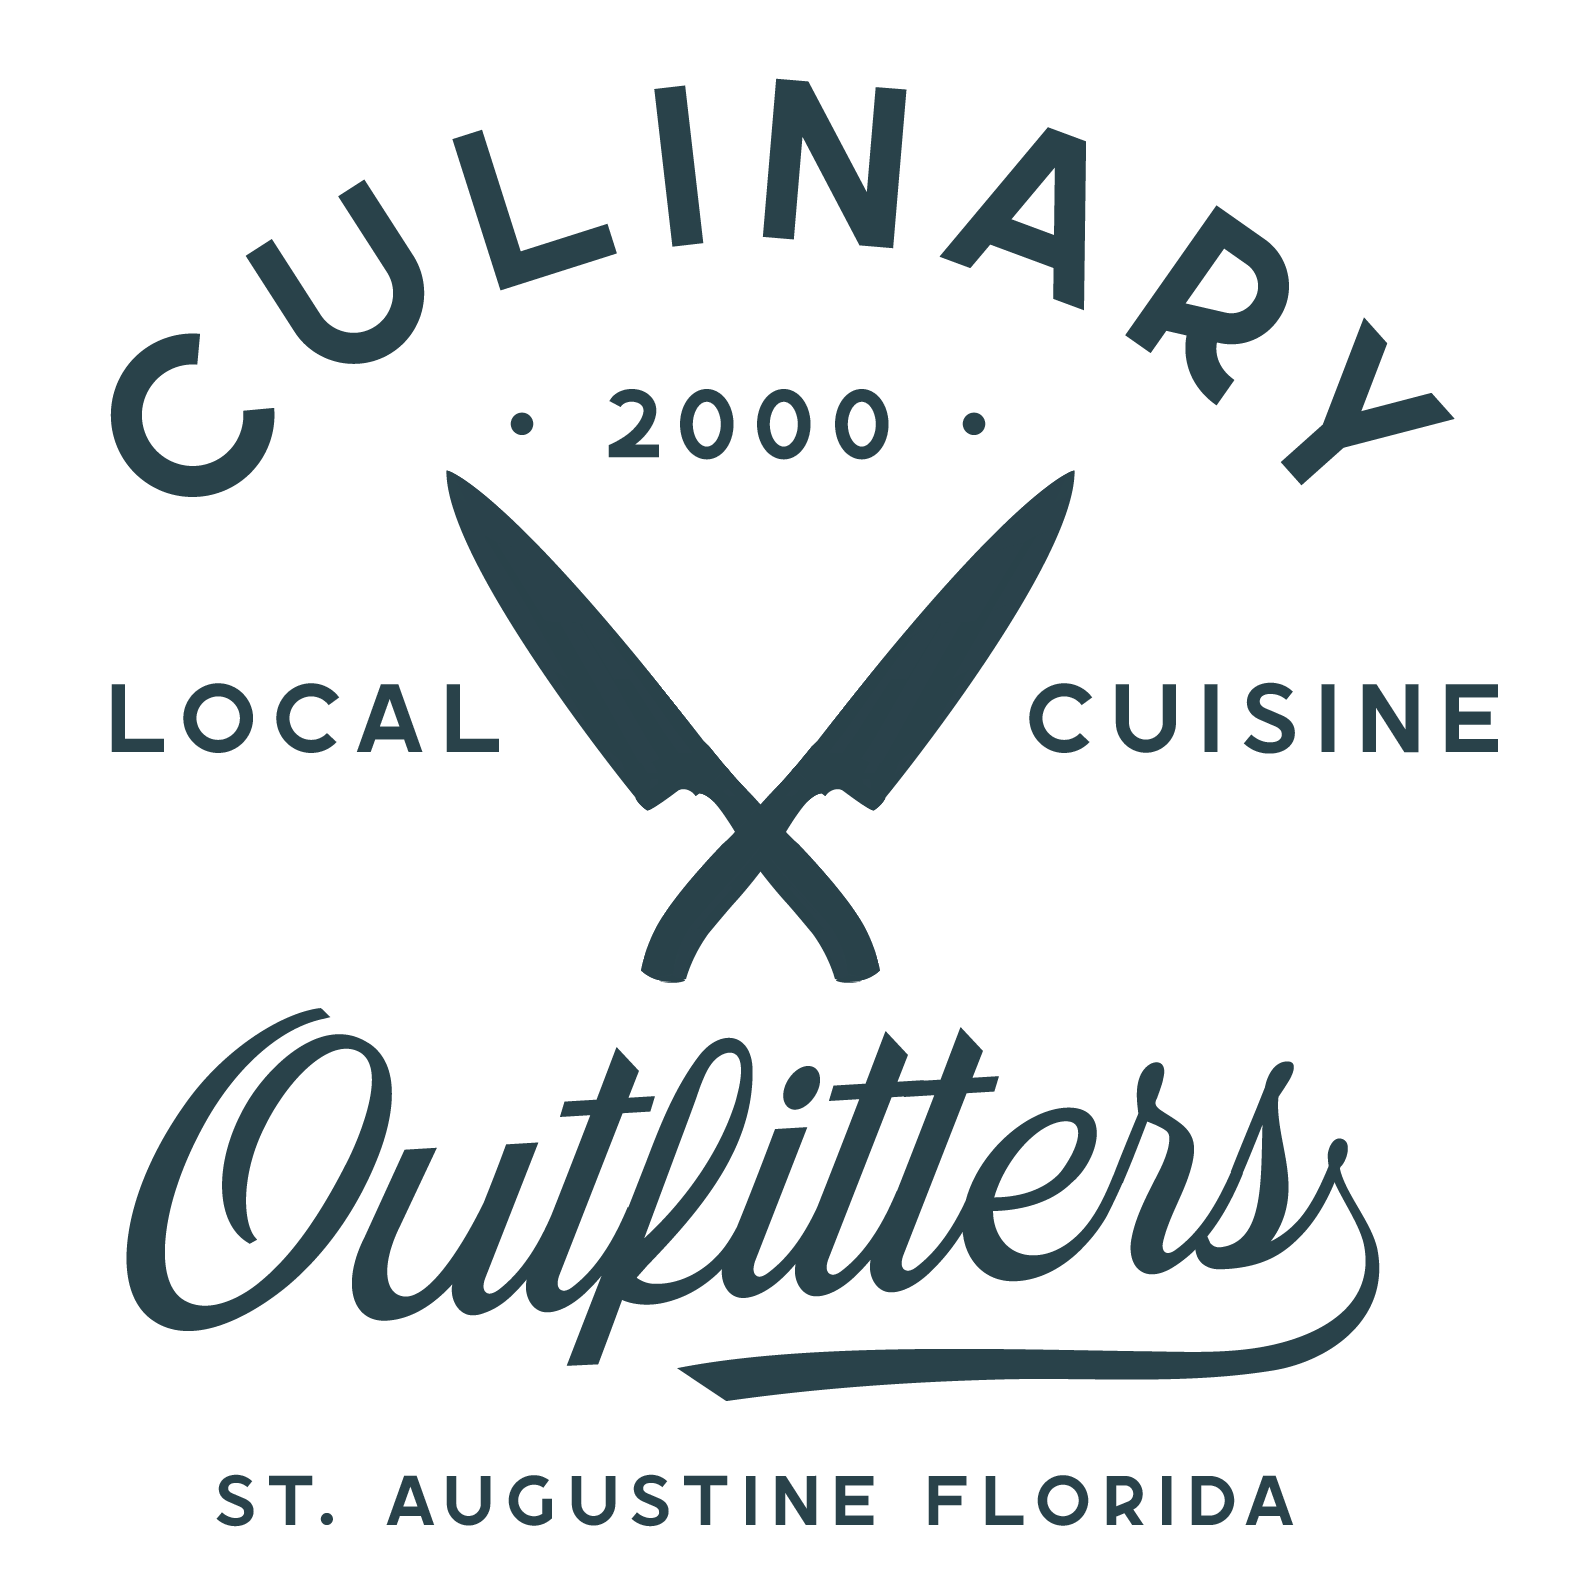 Cullinary Outfitters logo